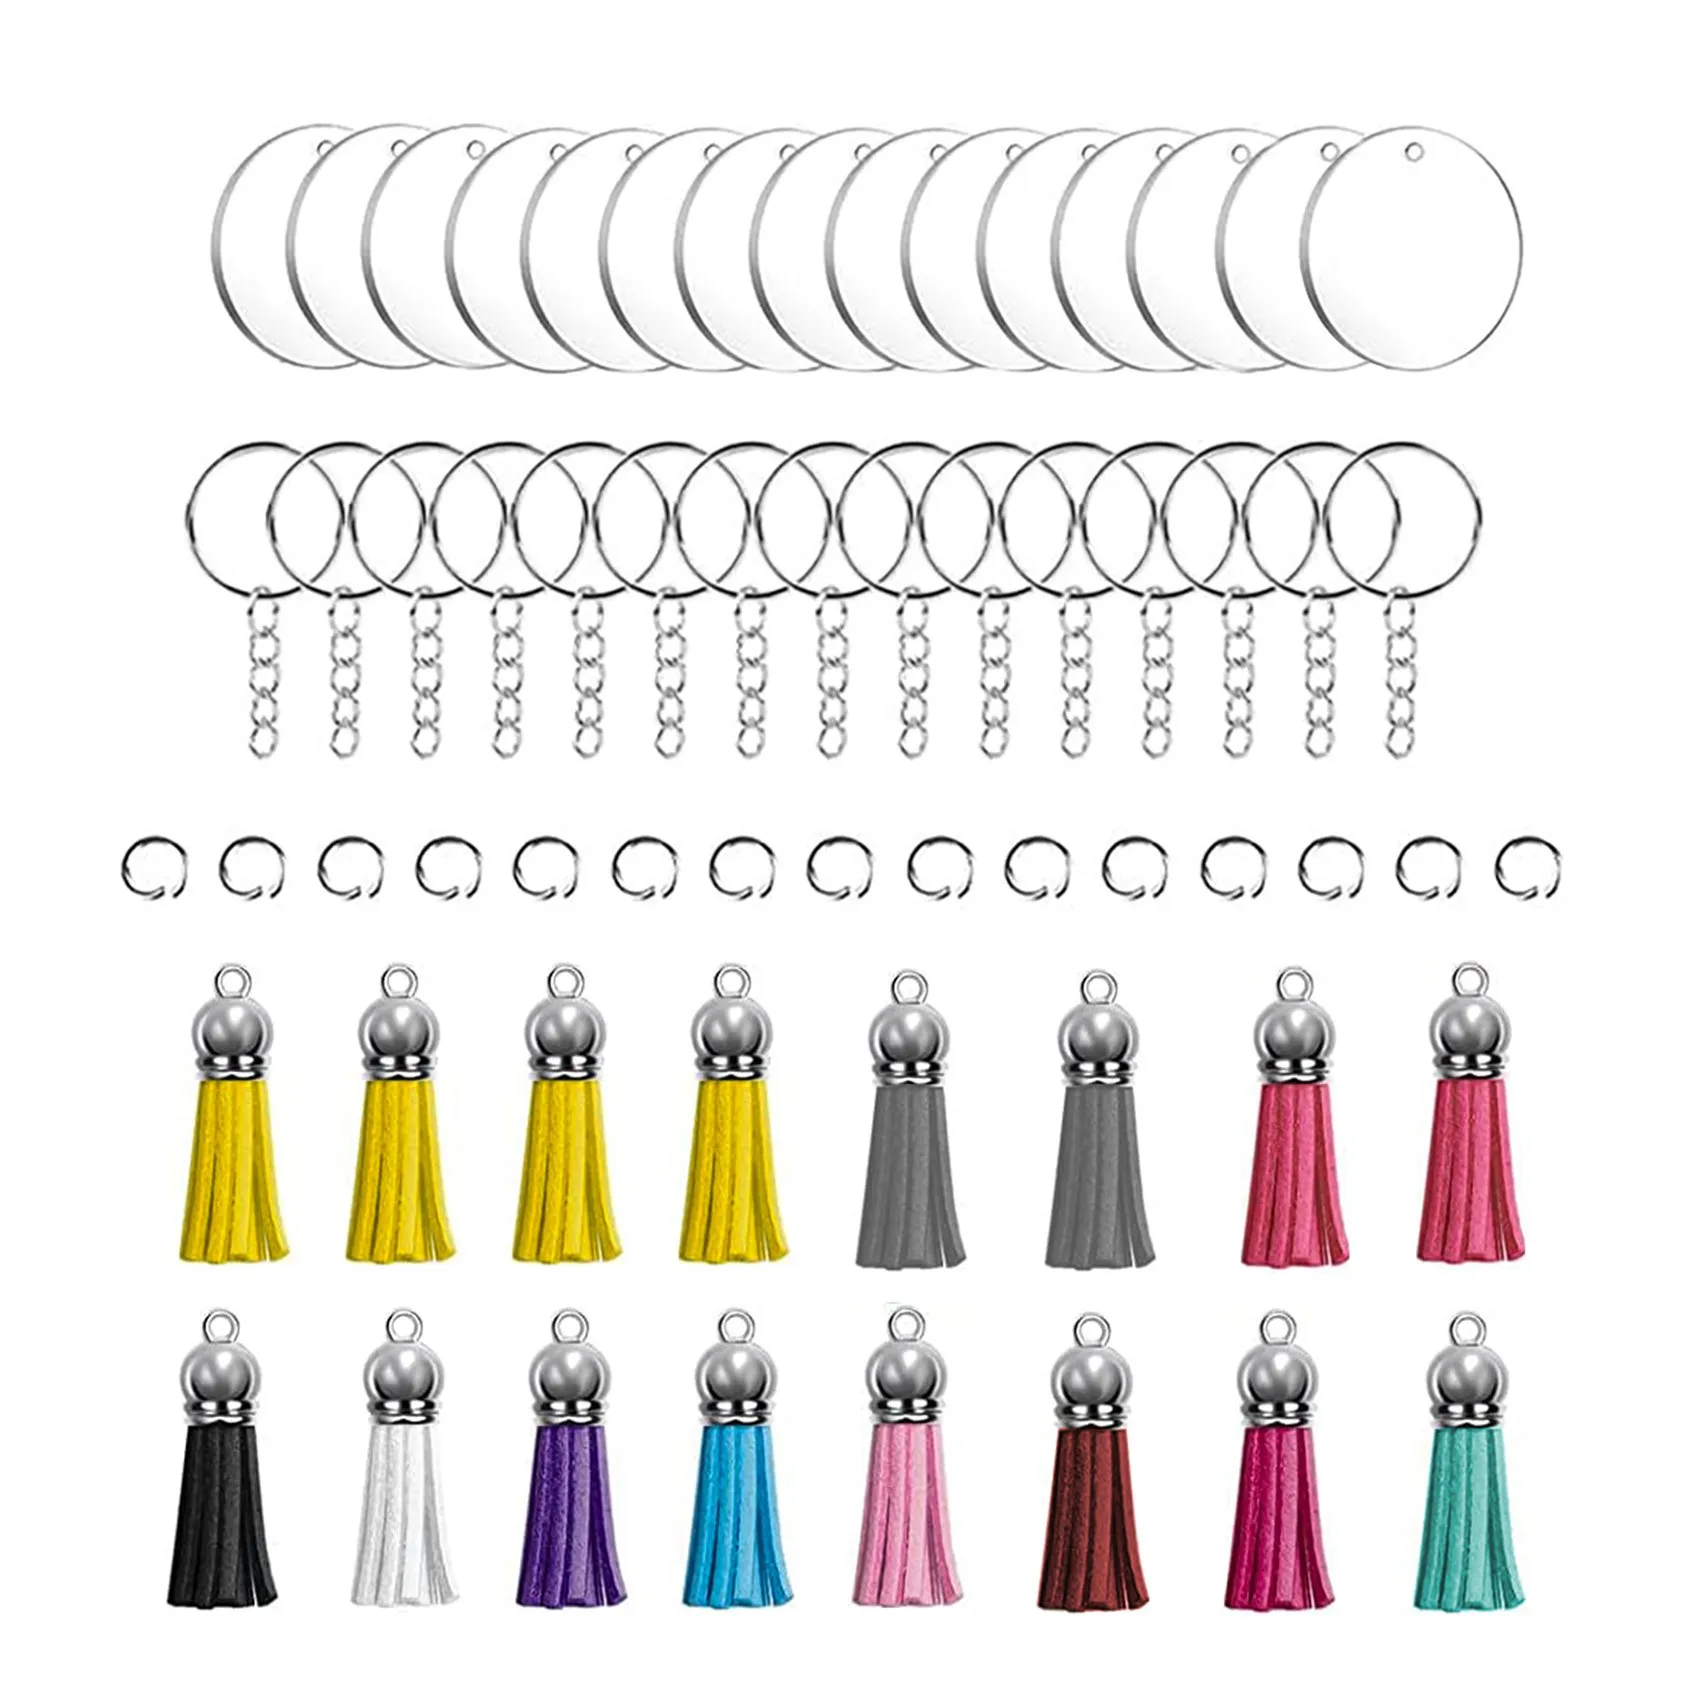 

64 Pcs Acrylic Transparent Discs Blank Keychains Circle Key Chains and Tassel Pendant Keyring for DIY Project and Crafts